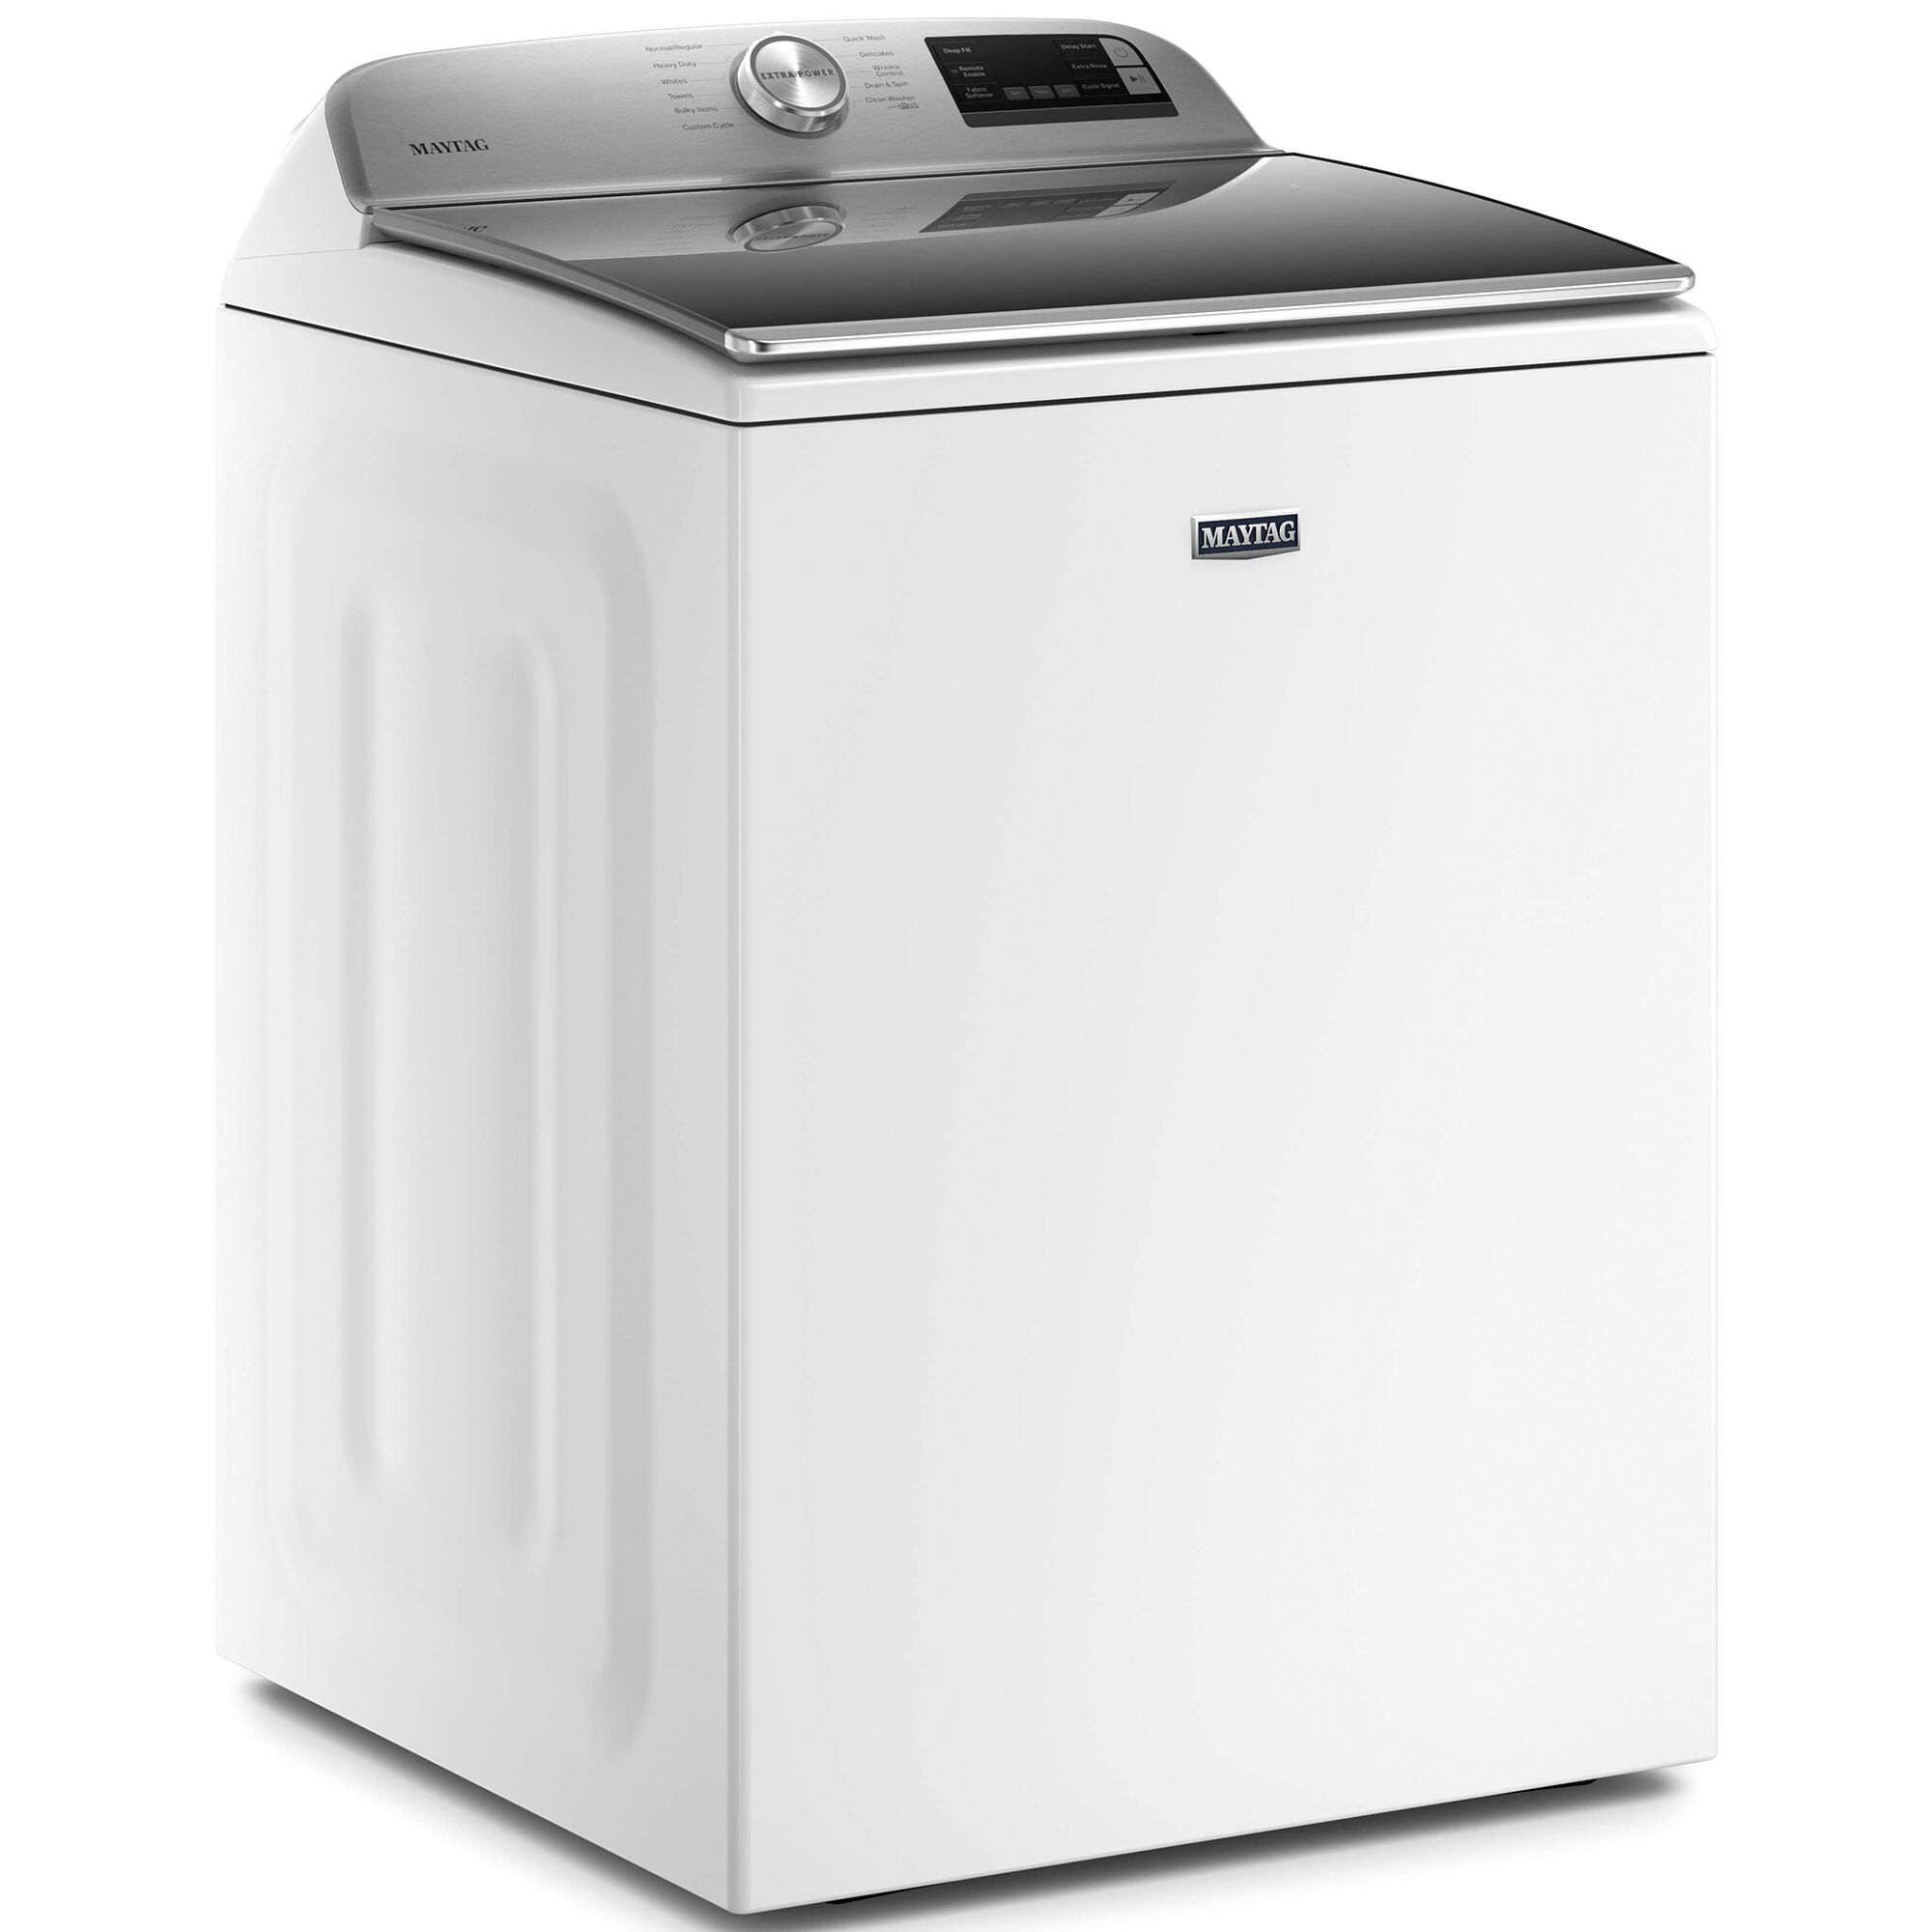 Maytag 27 in. 4.7 cu. ft. Smart Top Load Washer with Agitator